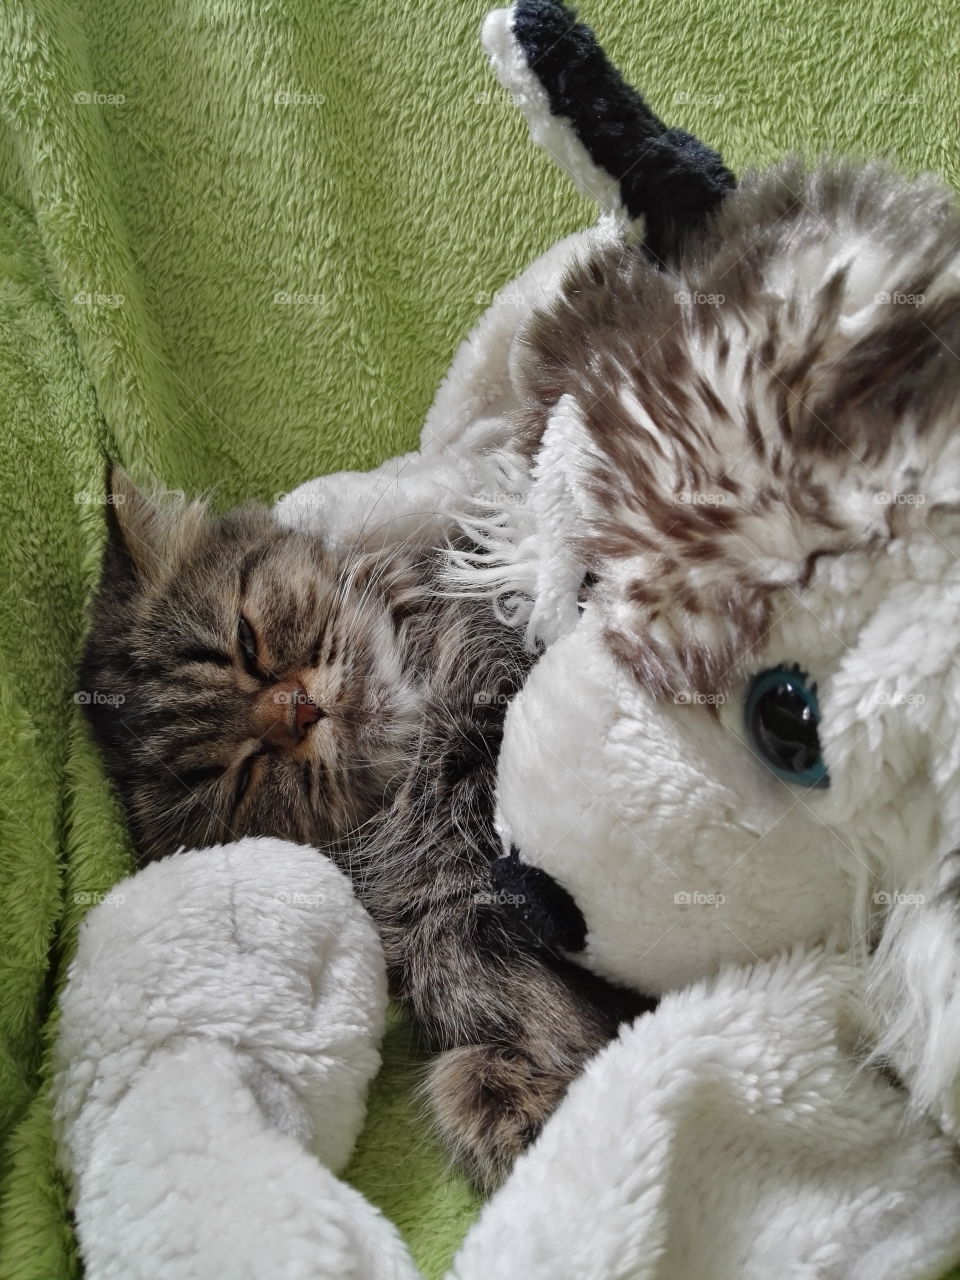 fluffy cat with fluffy mascot on fluffy couch